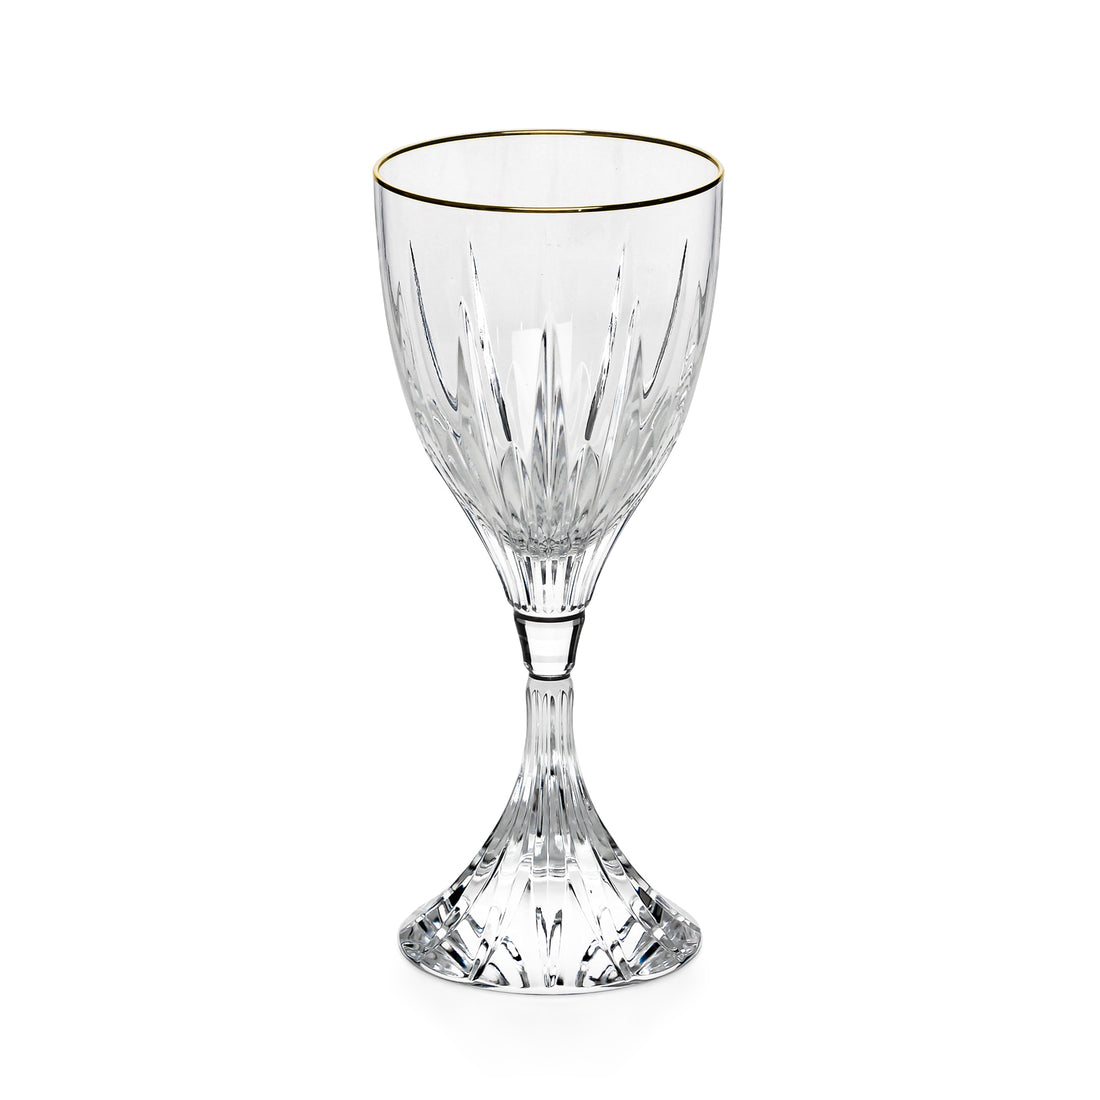 CHRISTOFLE Cathedrale Or Crystal Wine Glasses - Set of 11